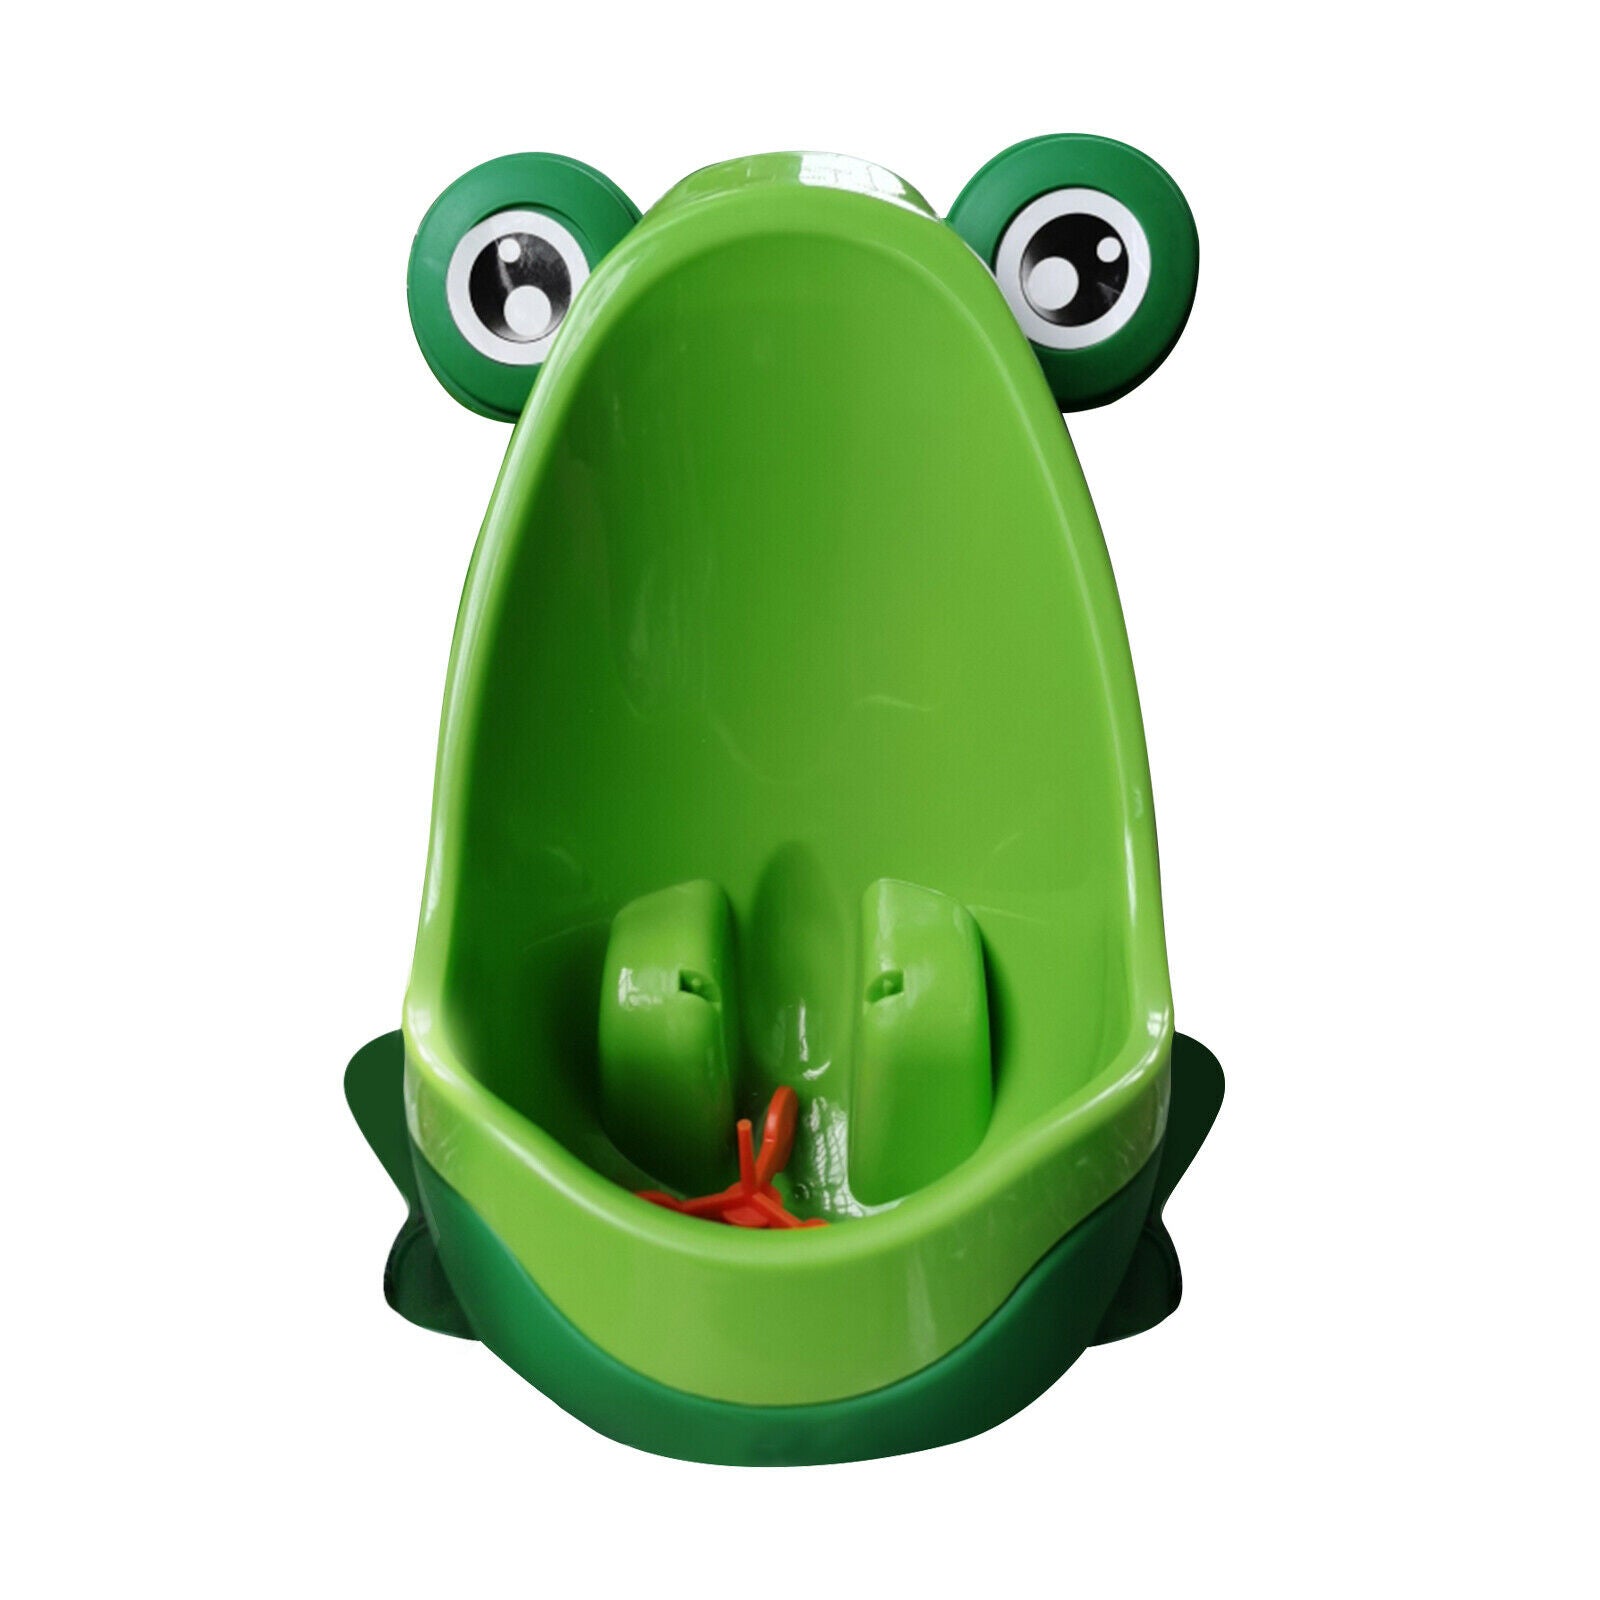 Lightweight Potty Trainer Urinal Wall-mounted for Boys Accessories Green